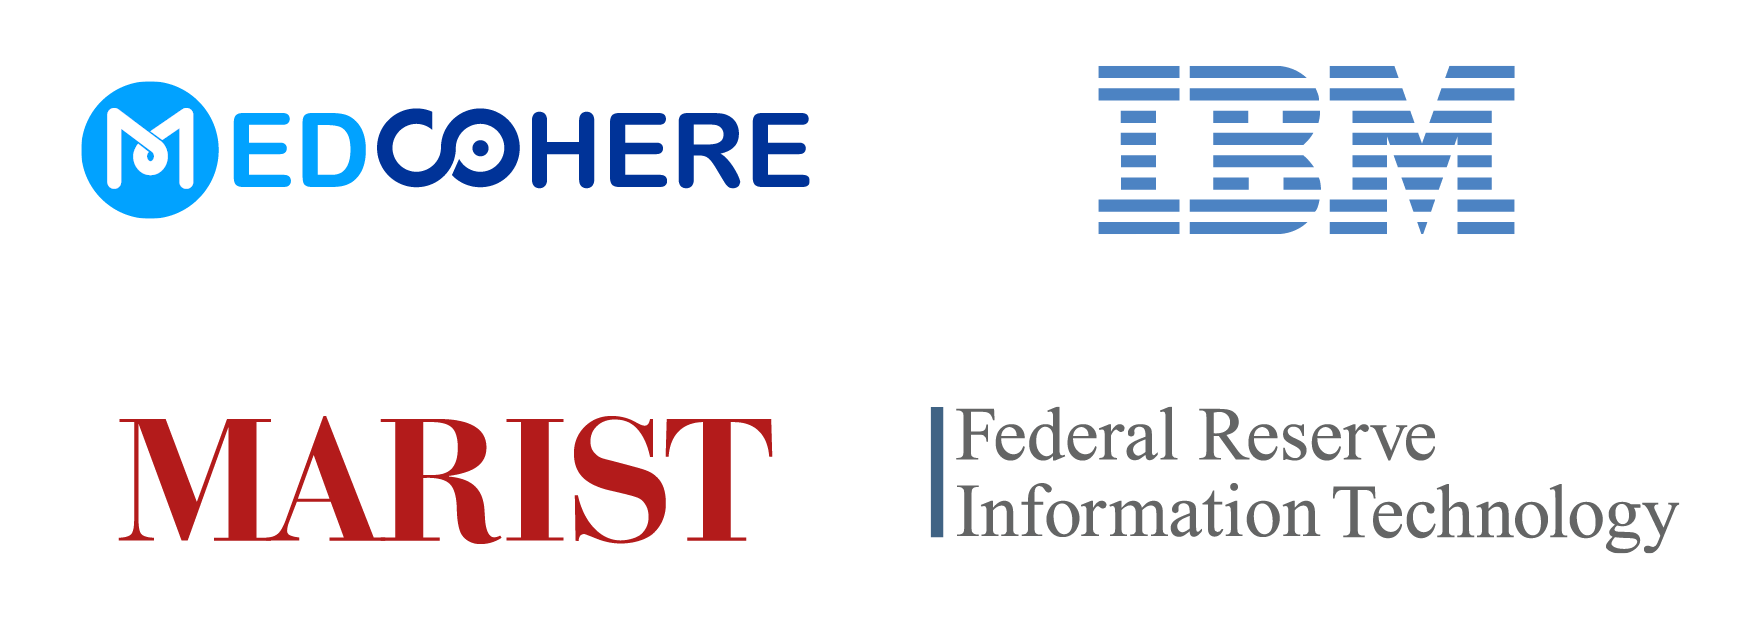 Logos of Computer Science career destinations: MedCohere, IBM, Marist College, and Federal Reserve Information Technology